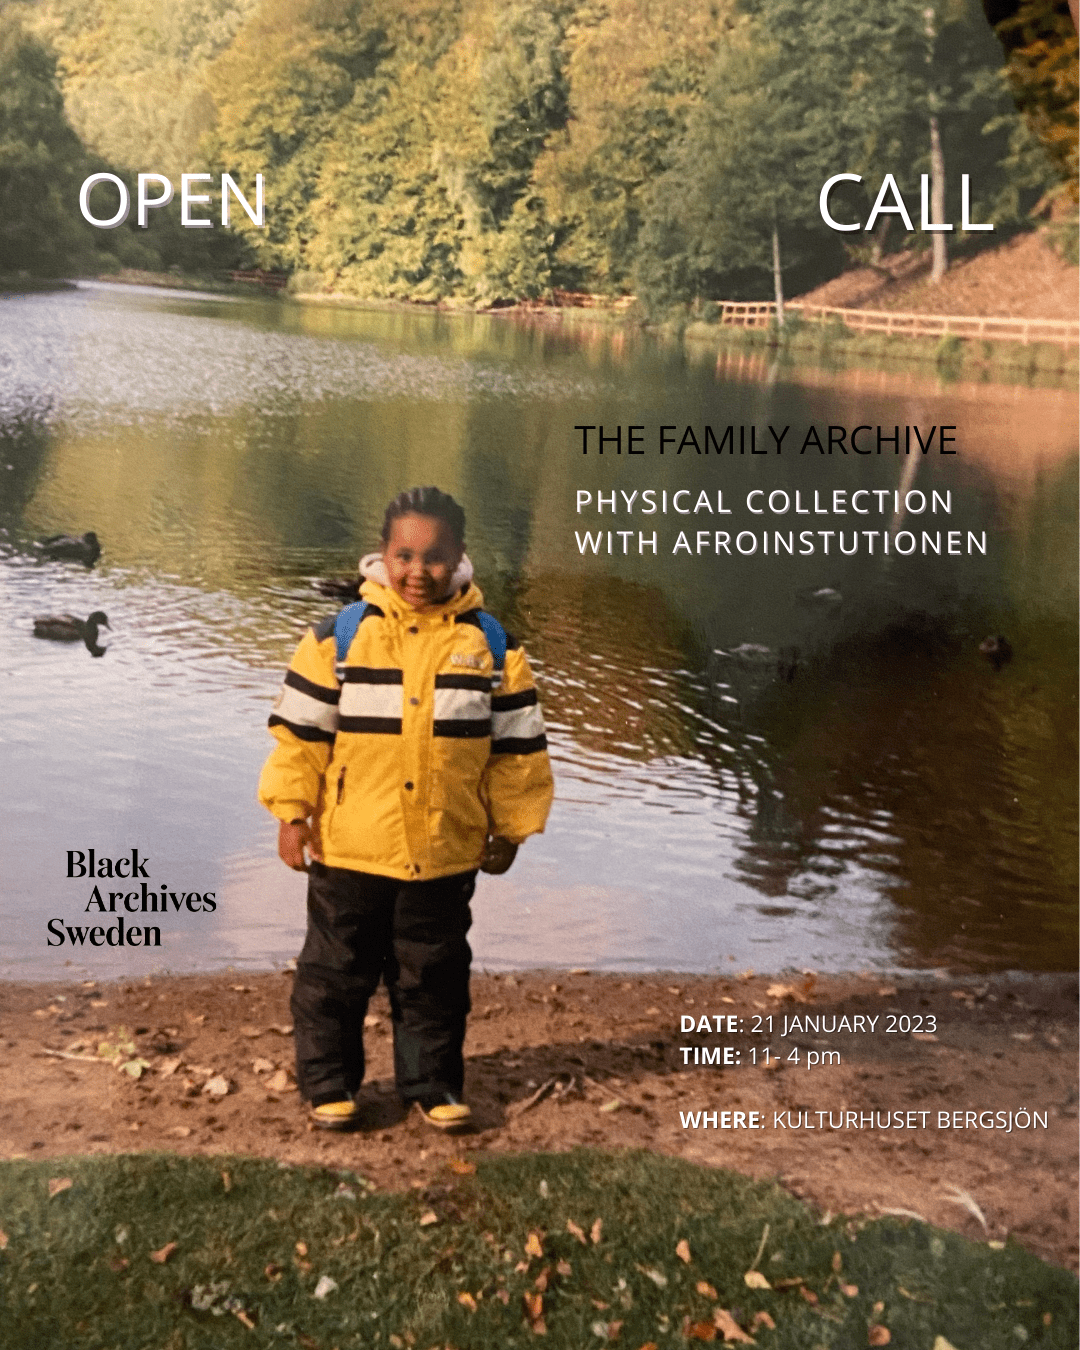 An image of black child in a bright yellow jacket, standing infront of a lake.